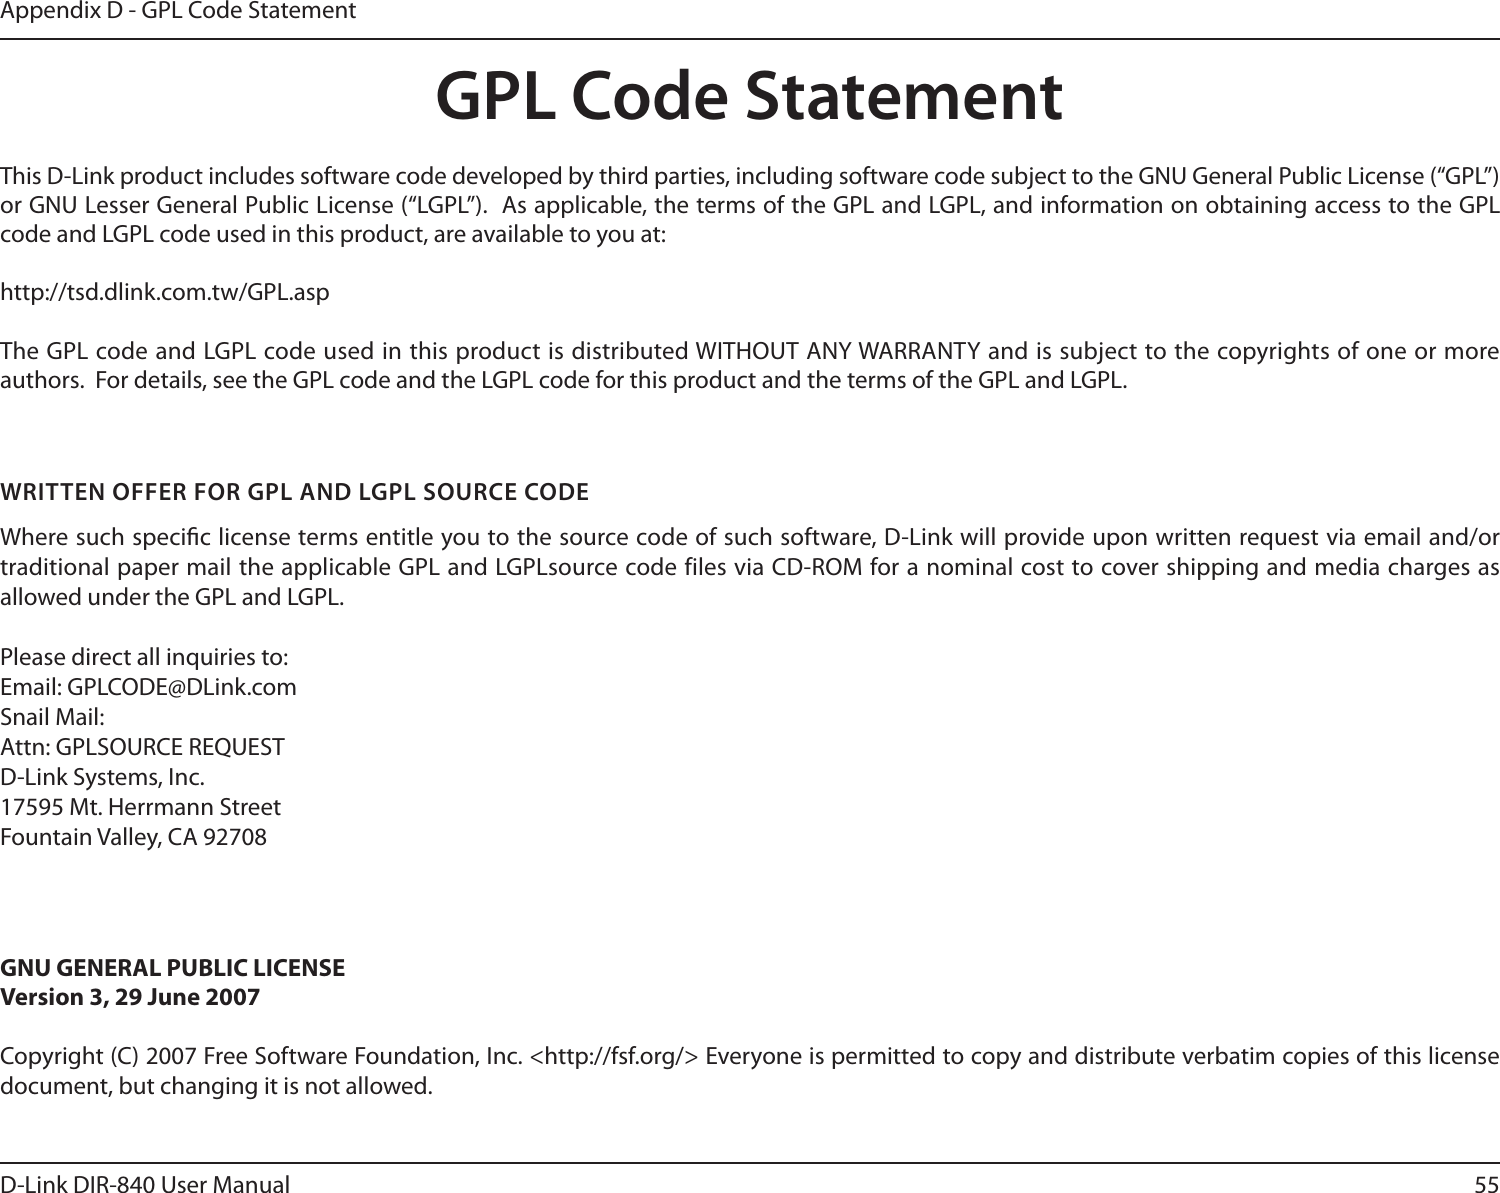 55D-Link DIR-840 User ManualAppendix D - GPL Code StatementGPL Code StatementThis D-Link product includes software code developed by third parties, including software code subject to the GNU General Public License (“GPL”) or GNU Lesser General Public License (“LGPL”).  As applicable, the terms of the GPL and LGPL, and information on obtaining access to the GPL code and LGPL code used in this product, are available to you at:http://tsd.dlink.com.tw/GPL.aspThe GPL code and LGPL code used in this product is distributed WITHOUT ANY WARRANTY and is subject to the copyrights of one or more authors.  For details, see the GPL code and the LGPL code for this product and the terms of the GPL and LGPL.WRITTEN OFFER FOR GPL AND LGPL SOURCE CODEWhere such specic license terms entitle you to the source code of such software, D-Link will provide upon written request via email and/or traditional paper mail the applicable GPL and LGPLsource code files via CD-ROM for a nominal cost to cover shipping and media charges as allowed under the GPL and LGPL.  Please direct all inquiries to:Email: GPLCODE@DLink.comSnail Mail:Attn: GPLSOURCE REQUESTD-Link Systems, Inc.17595 Mt. Herrmann StreetFountain Valley, CA 92708GNU GENERAL PUBLIC LICENSEVersion 3, 29 June 2007Copyright (C) 2007 Free Software Foundation, Inc. &lt;http://fsf.org/&gt; Everyone is permitted to copy and distribute verbatim copies of this license document, but changing it is not allowed.